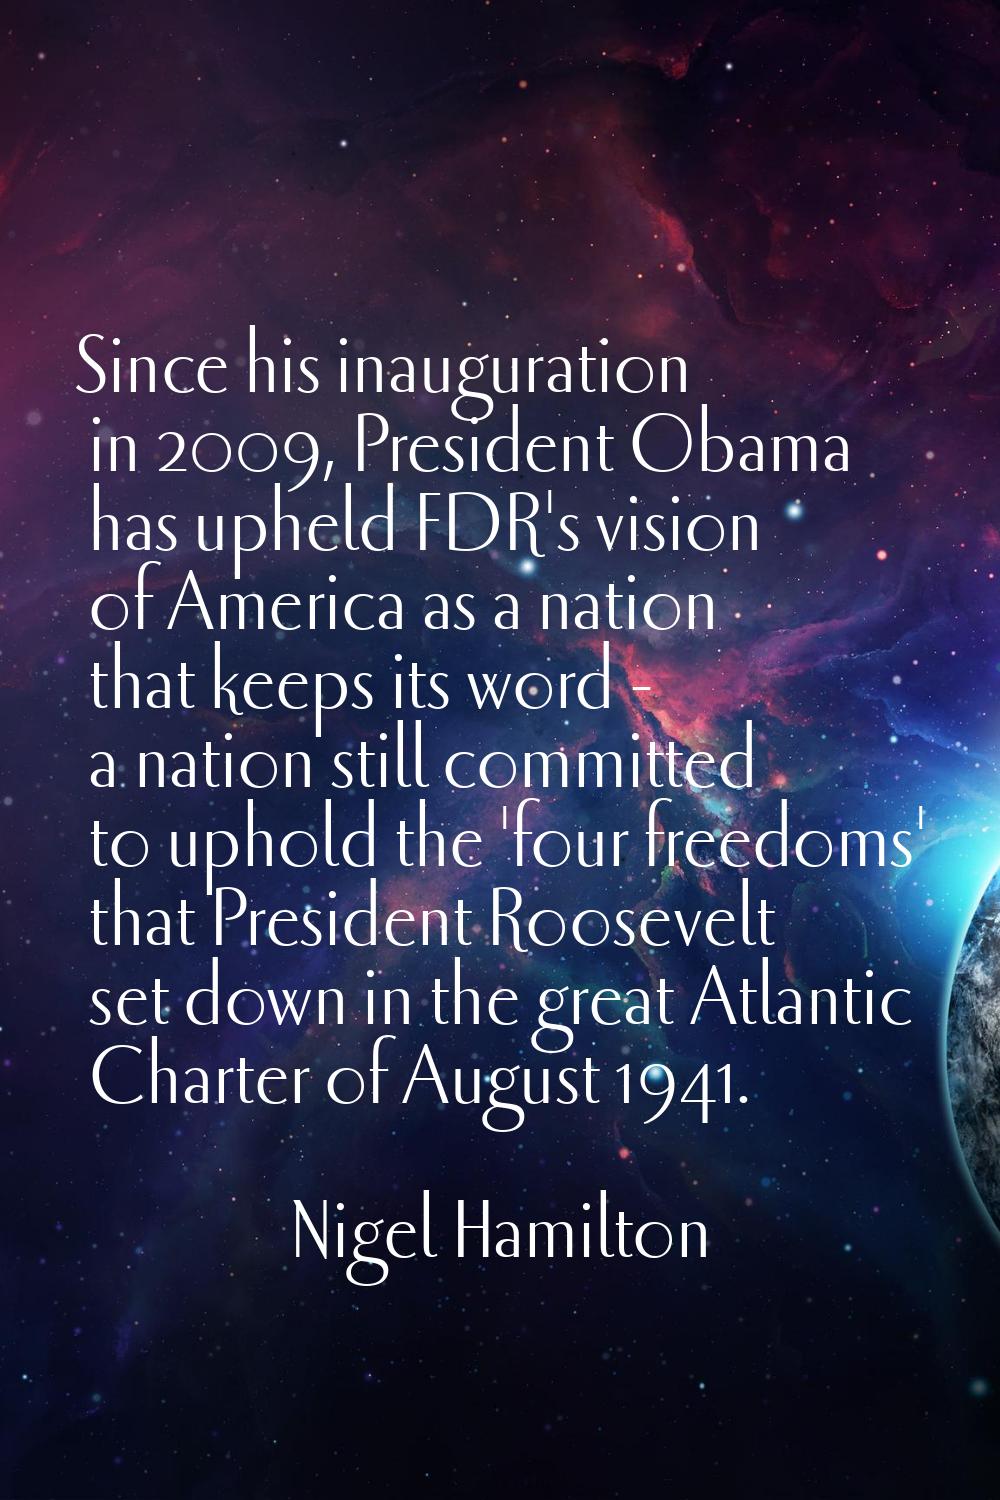 Since his inauguration in 2009, President Obama has upheld FDR's vision of America as a nation that